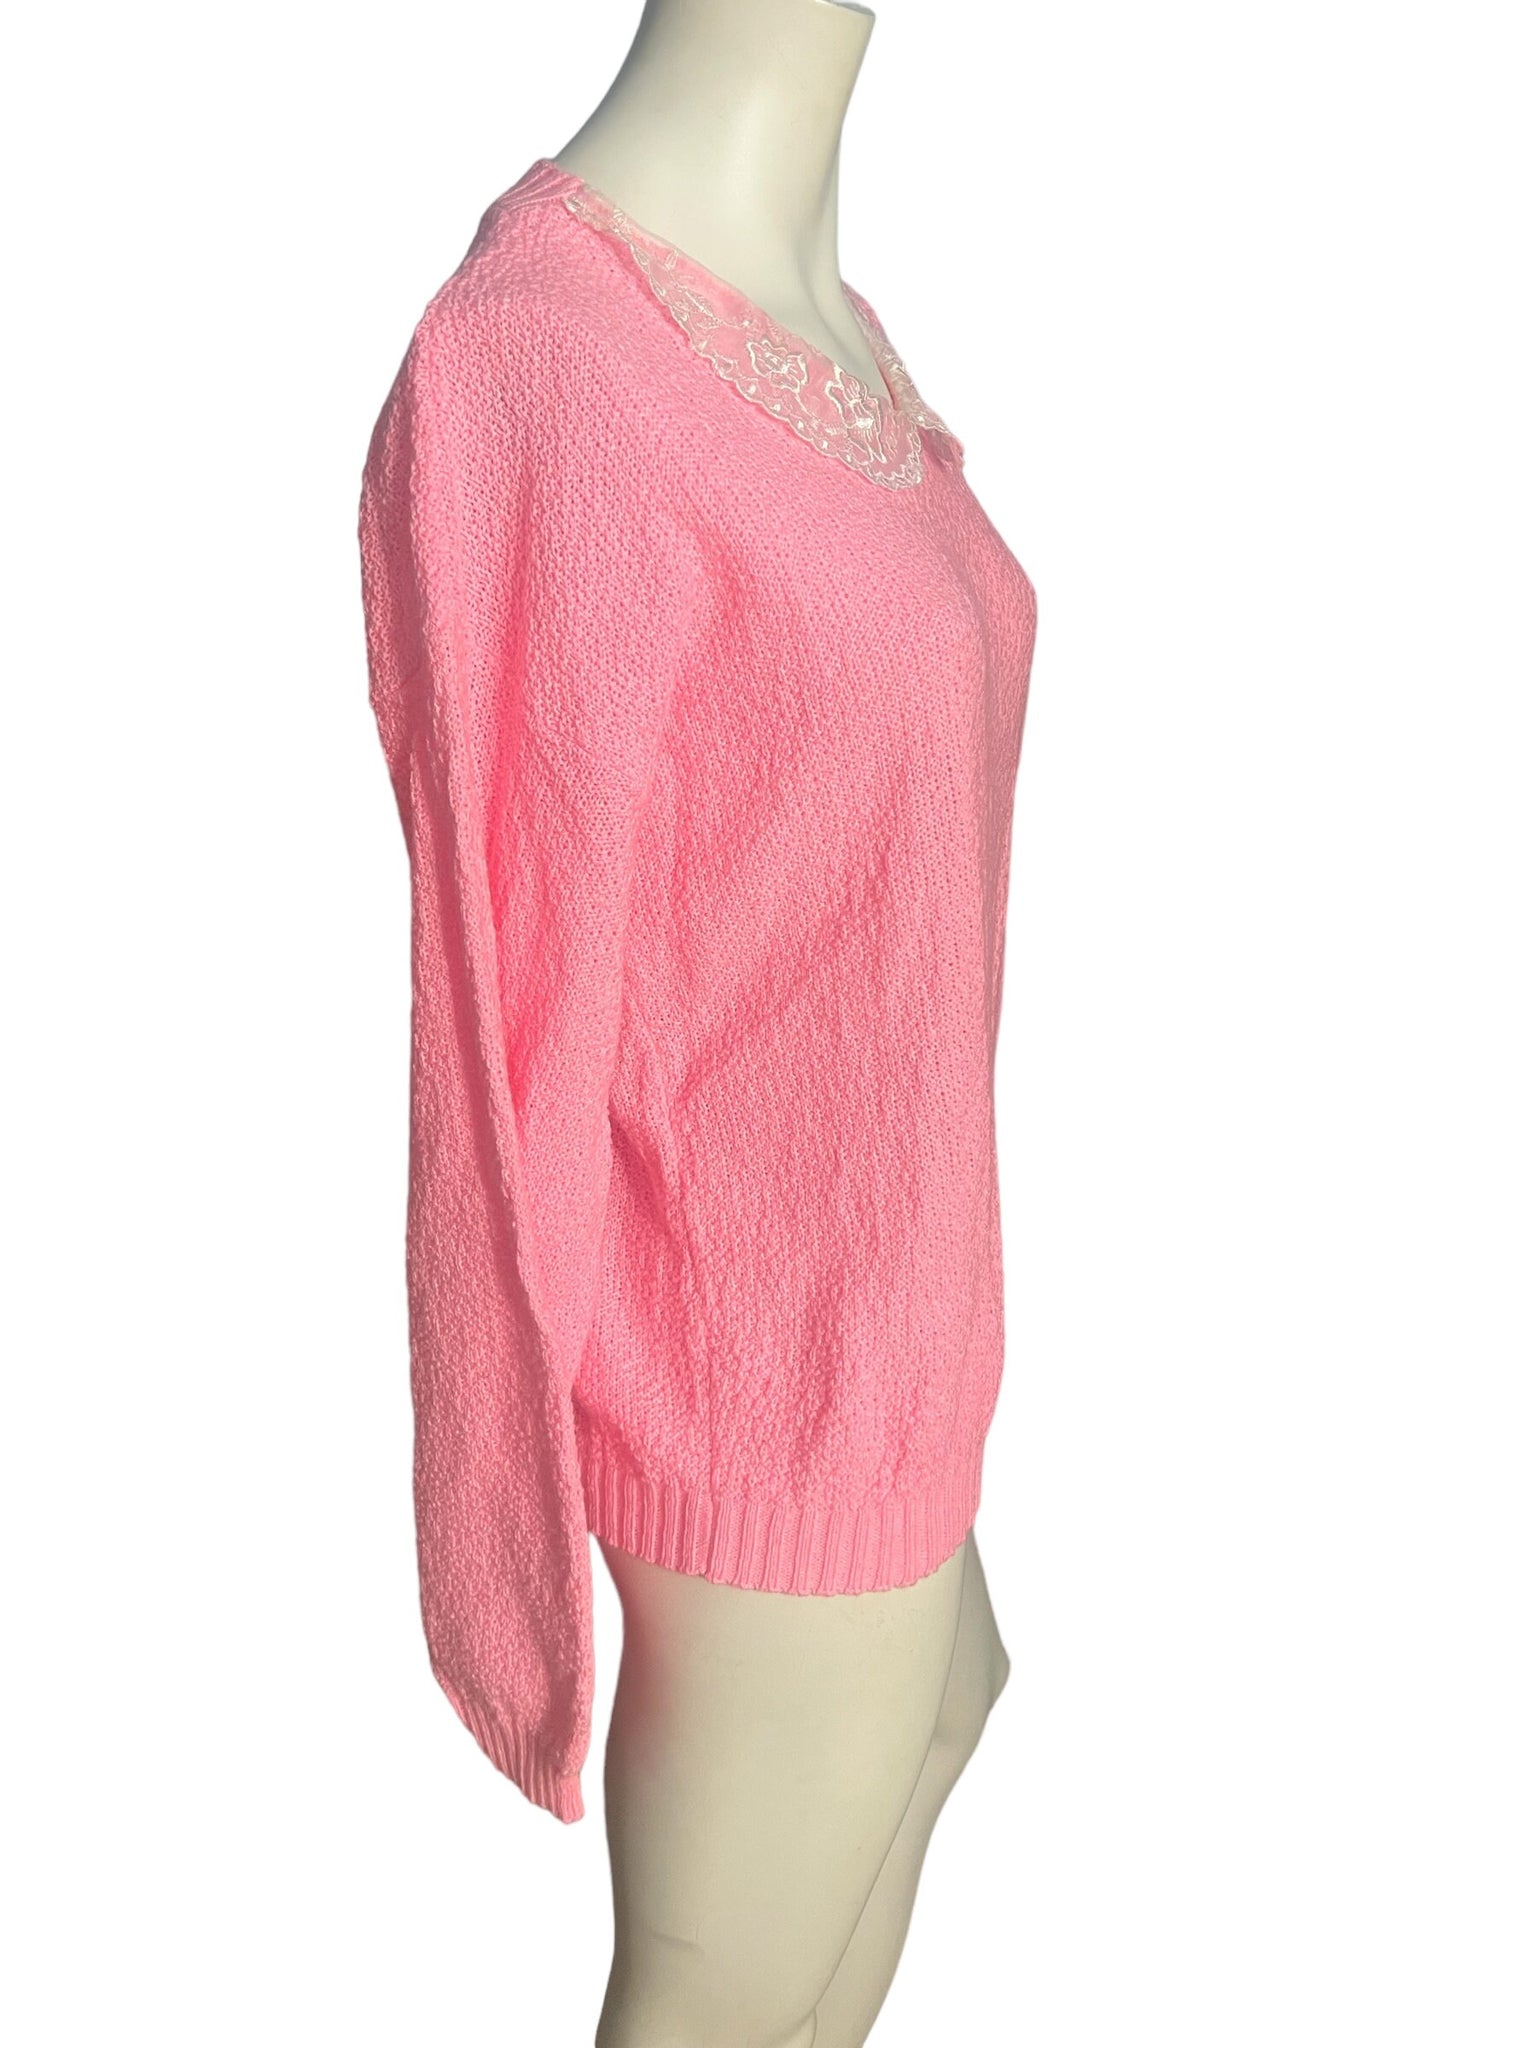 Vintage 80's pink sweater lace collar Brunny L